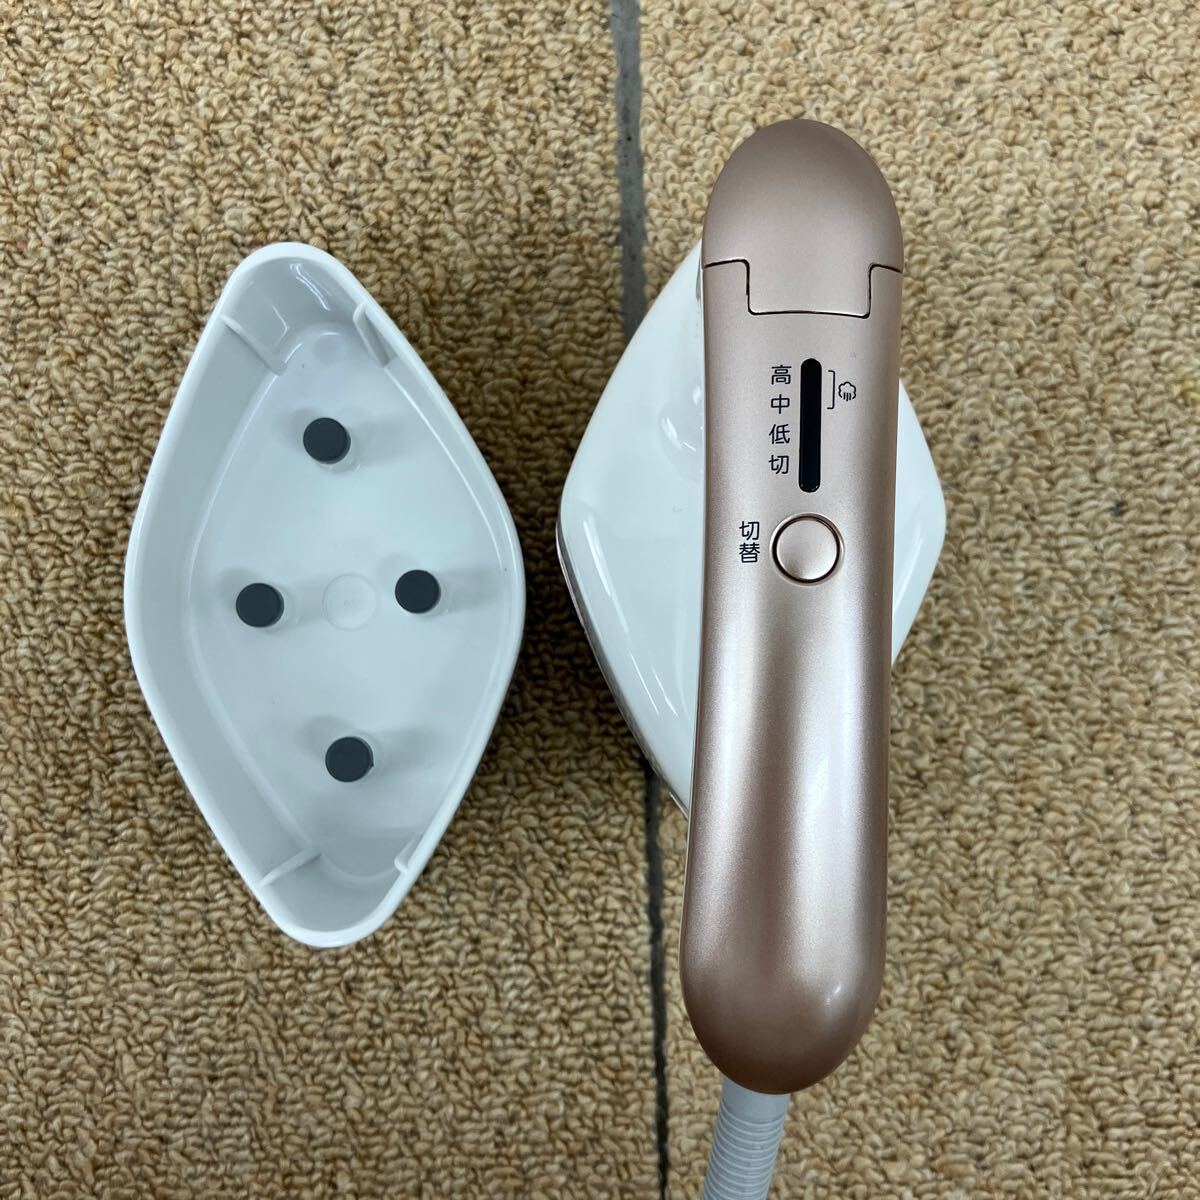 *[ selling out ]2022 year made! there there beautiful goods!HITACHI Hitachi clothes steamer CSI-RX3 white box attached operation verification ending life consumer electronics 